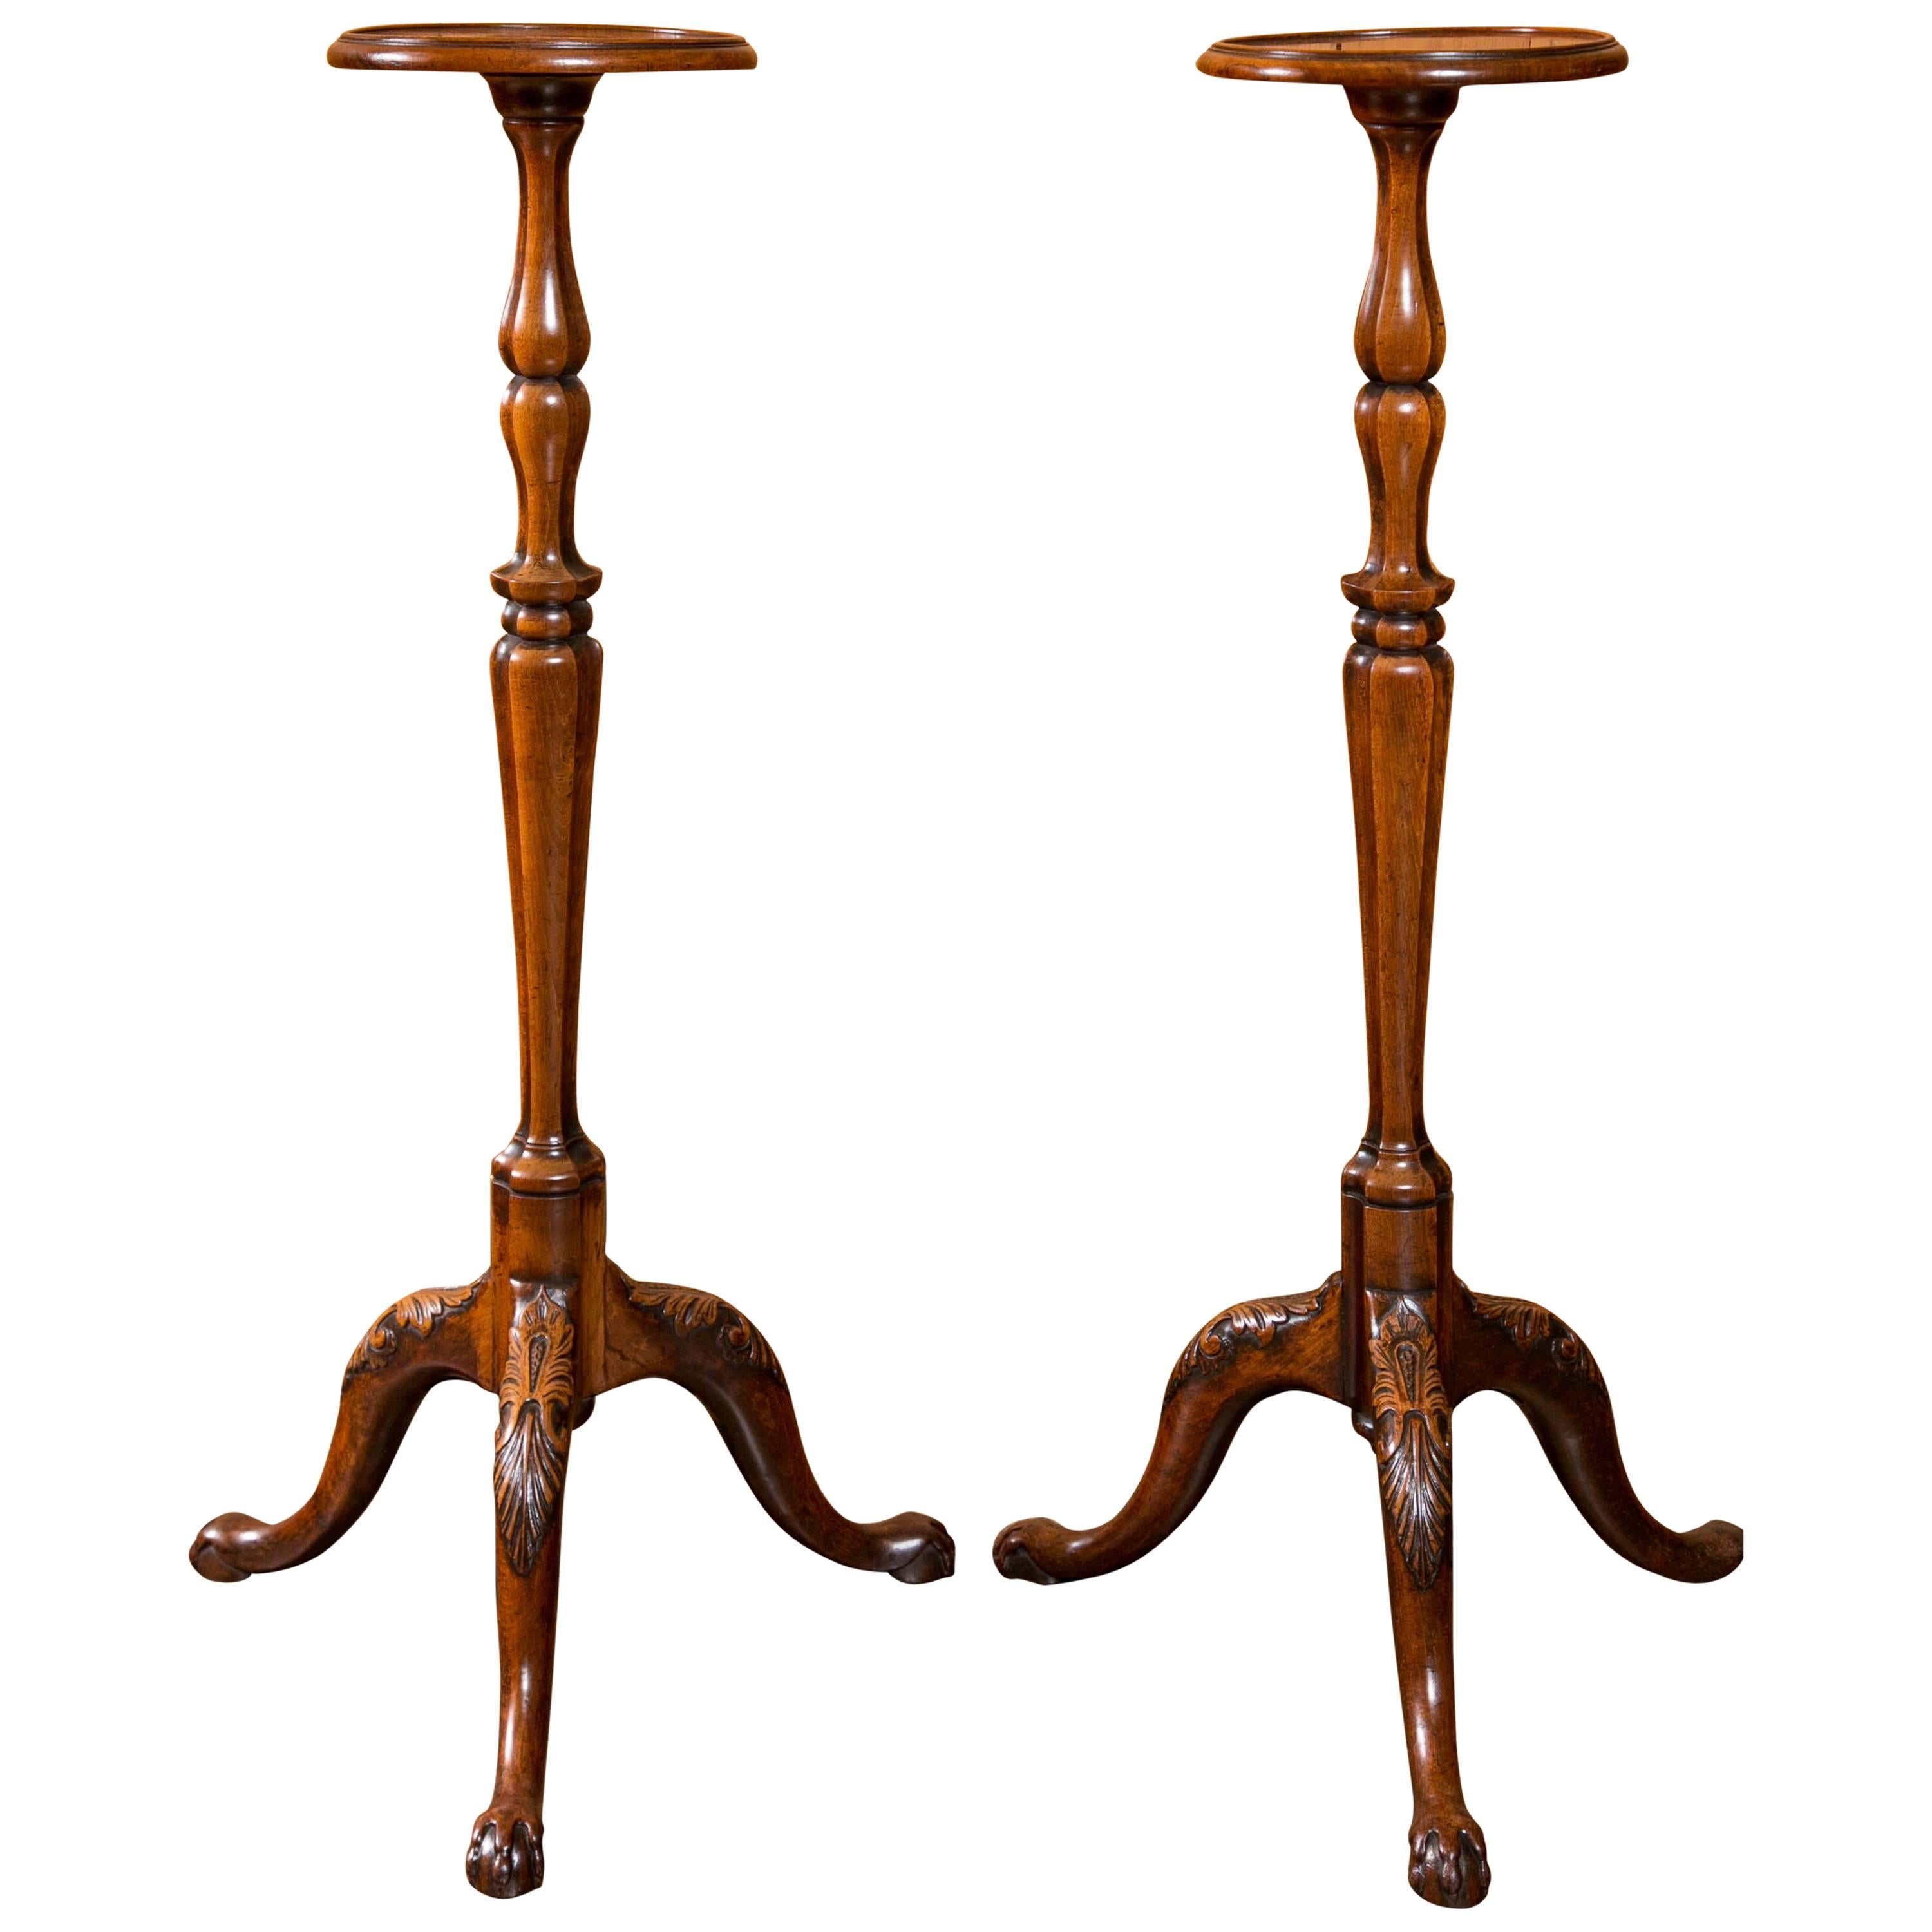 Pair of Matching Regency Walnut Candle Stands